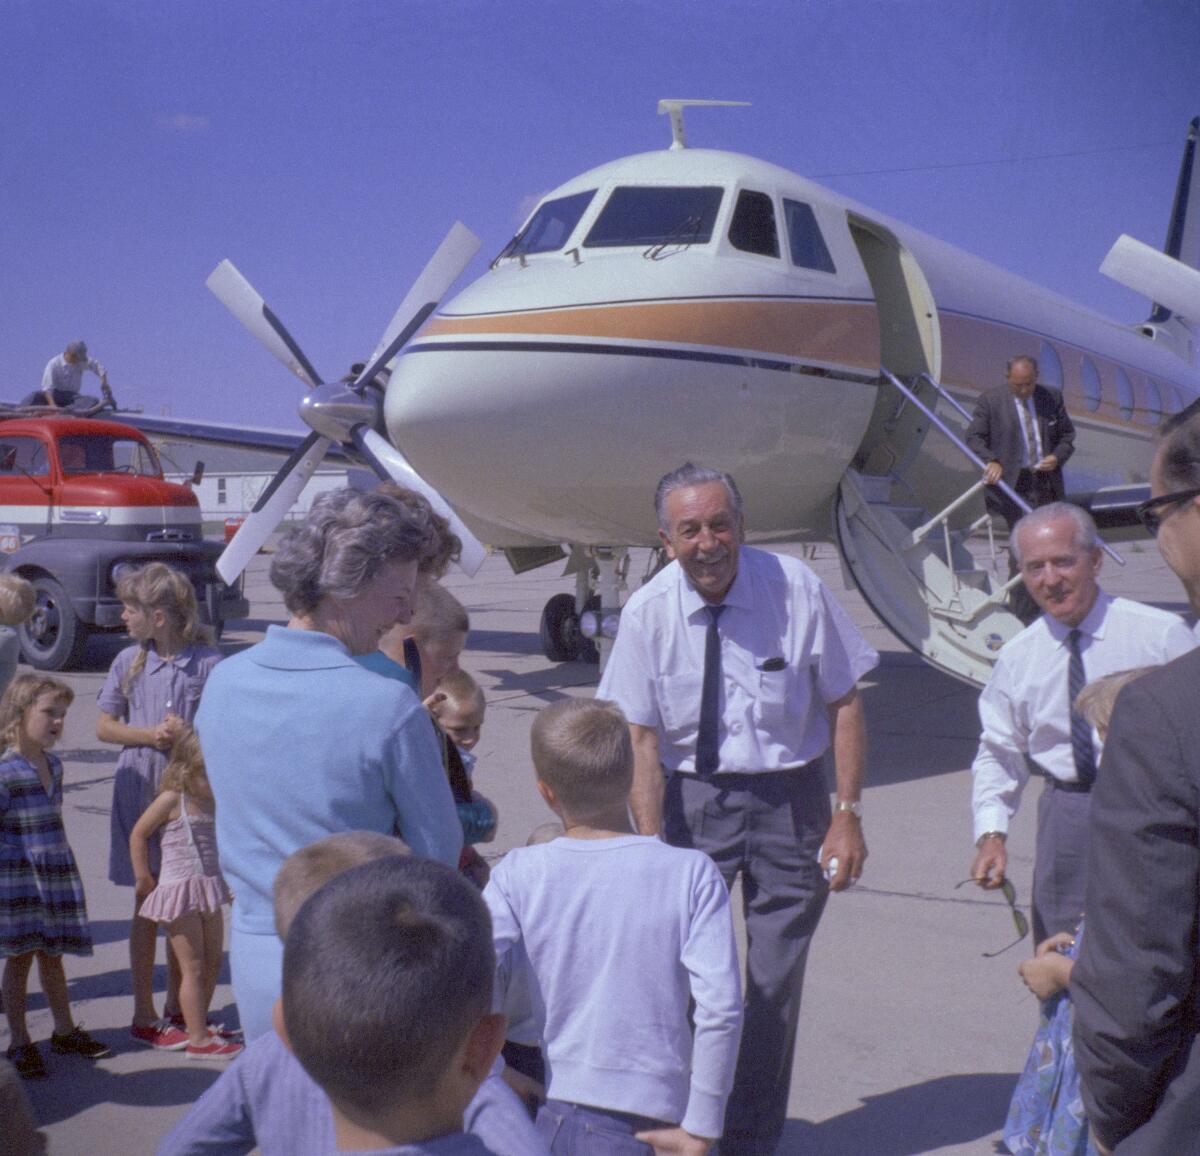 An image of Walt Disney in front of his Grumman Gulfstream I plane shared by Disney.